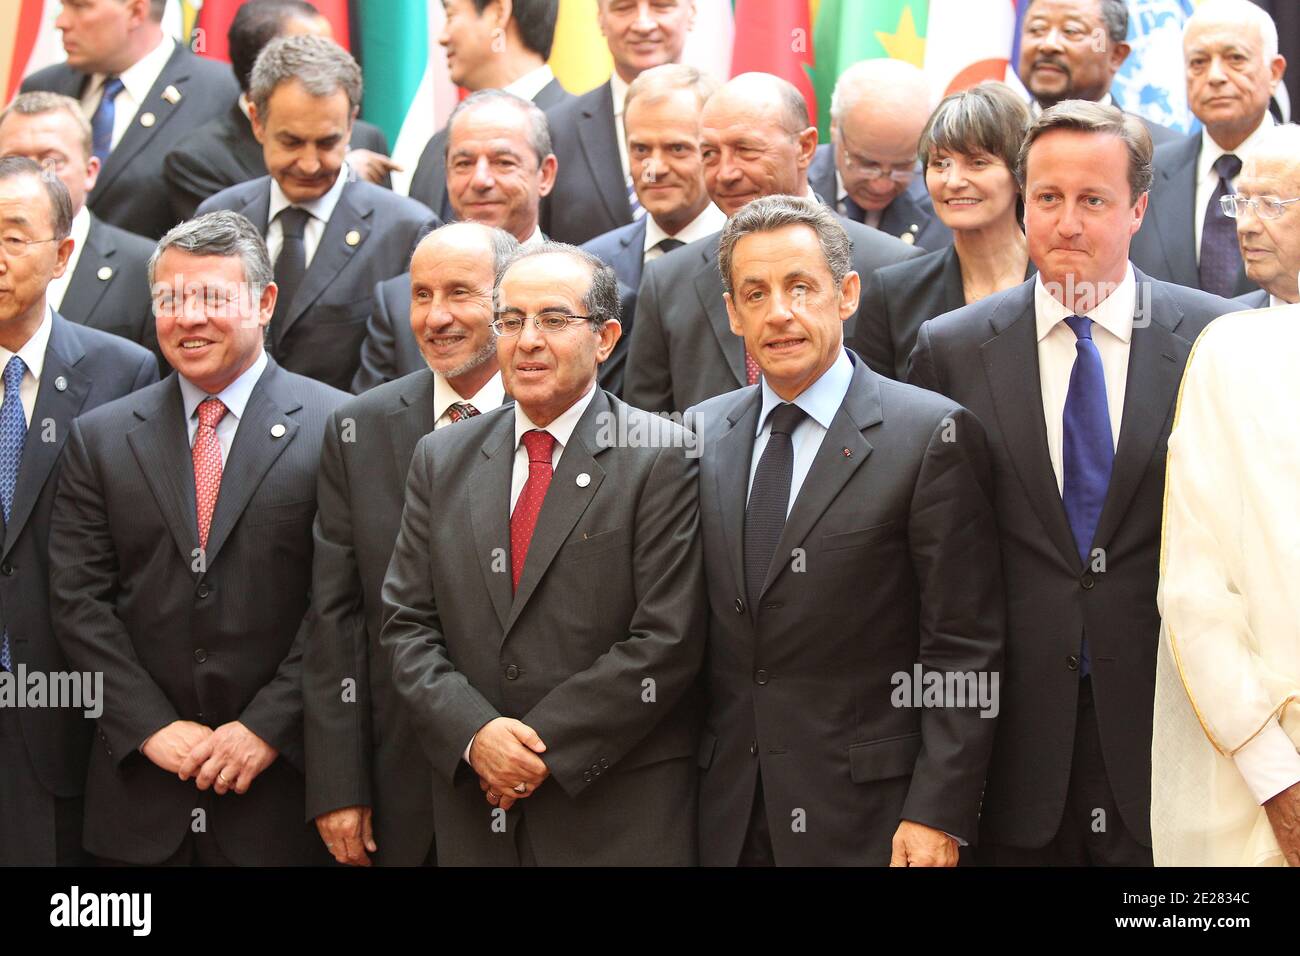 France's president Nicolas Sarkozy (C) poses with states' members and international organizations representatives as part of a summit on the post-Kadhafi era at the Elysee Palace in Paris, France on Sptember 1, 2011 (1srt row-RtoL) Kuwait's vice prime minister and foreign minister Cheikh Mohamed Sabah Al Salem Al Sabah United Kingdom's Prime Minister David Cameron; Sarkozy; number two in the rebels' NTC, Mahmud Jibril; Chairman of Libya's rebel Transitional National Council, Moustapha Abdel Jalil; King of Jordan Abdullah II; Secretary-General of the United Nations Ban Ki Moon. Photo by Thierry Stock Photo